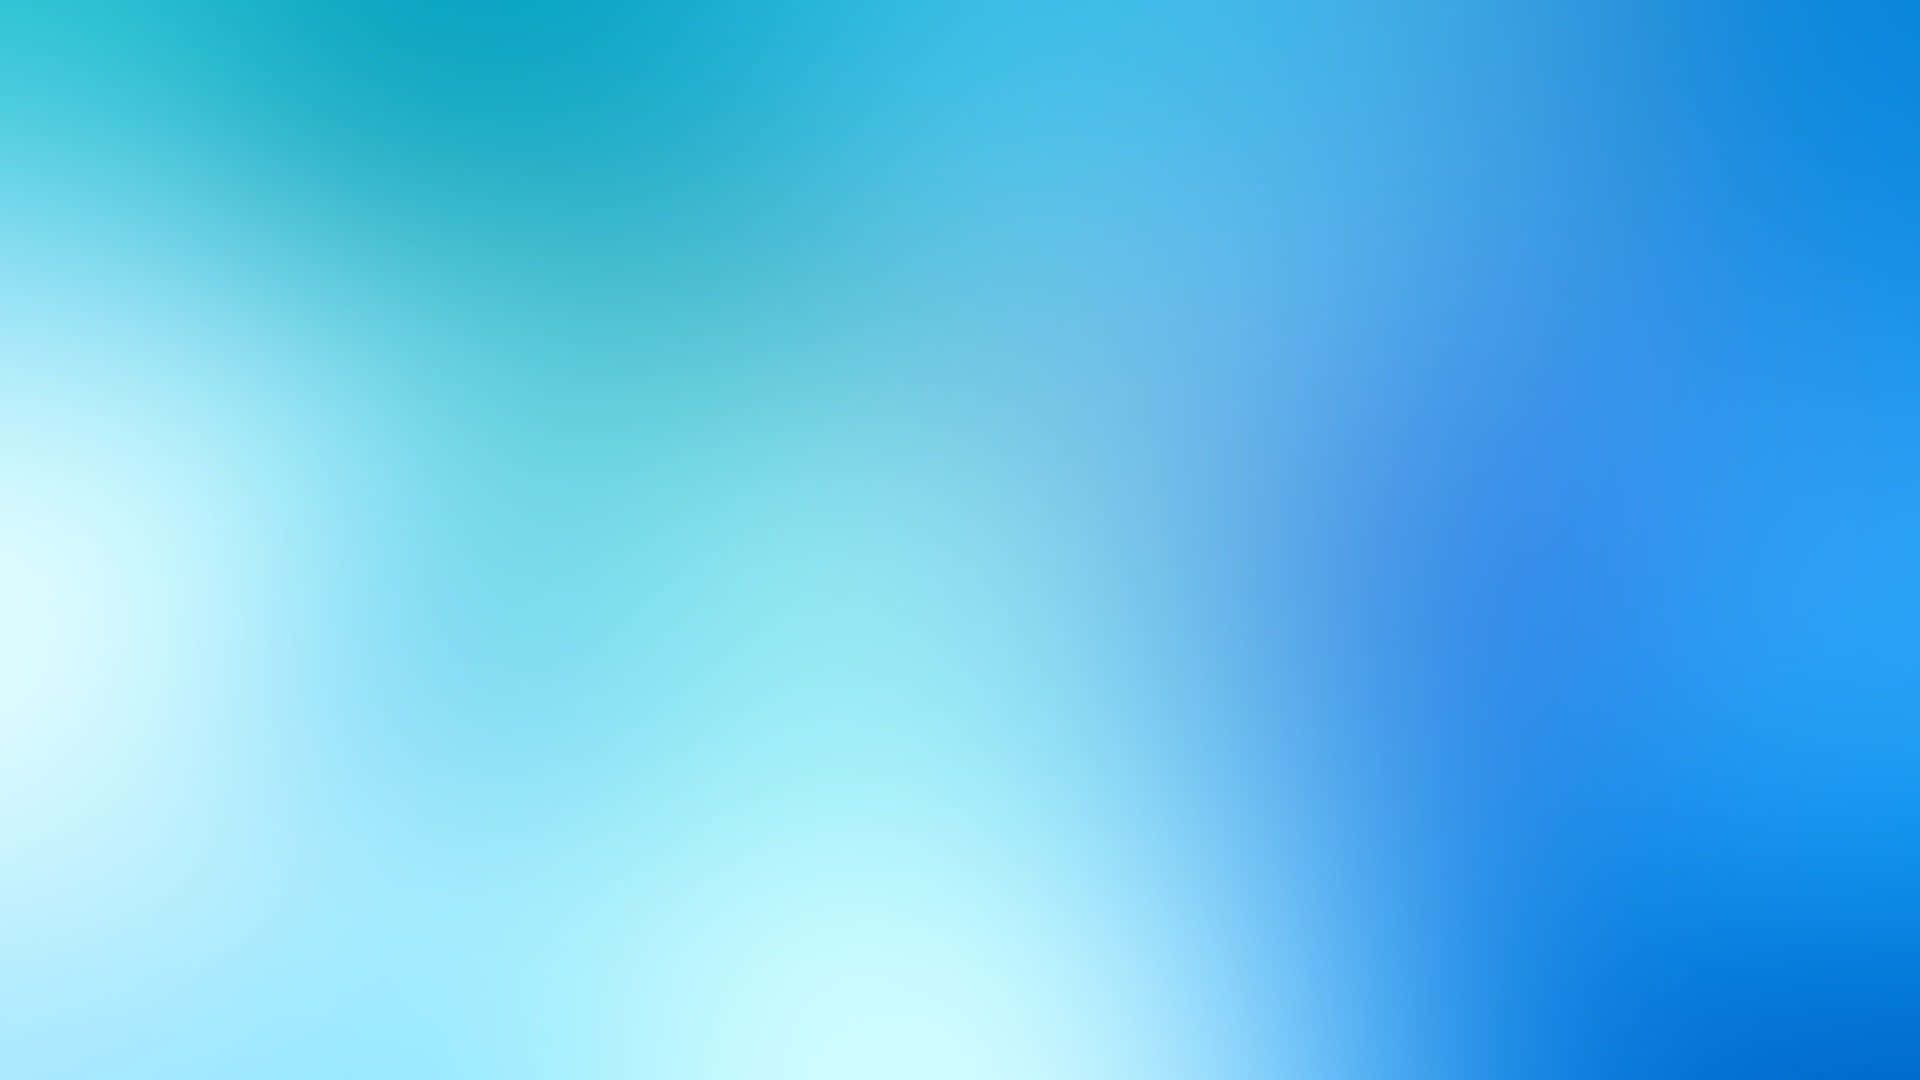 Download Blue And White Blurred Background Wallpaper